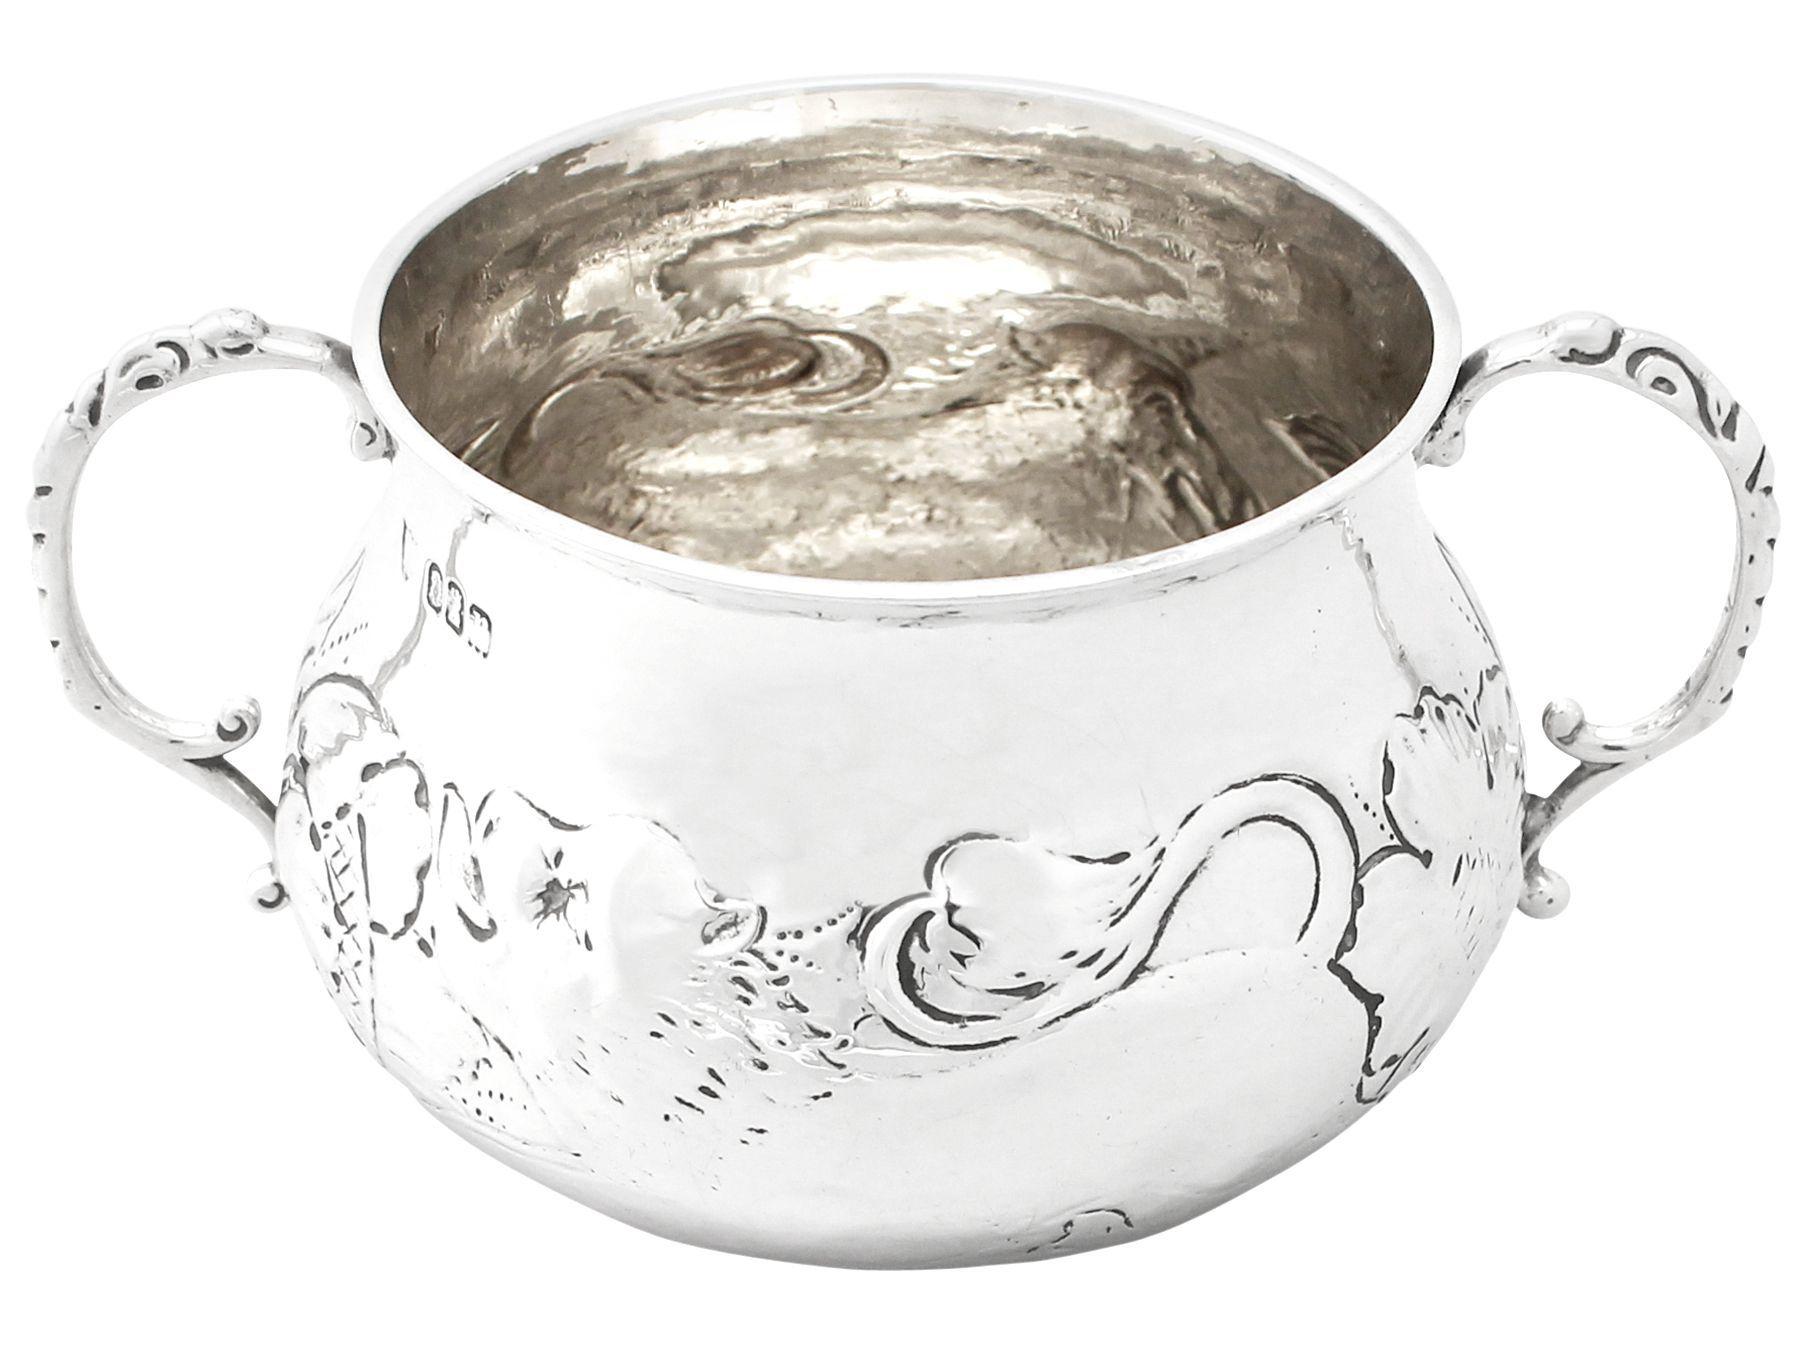 A very good antique George V English Britannia standard silver Charles II style porringer; an addition to our silverware collection.

This antique George V Britannia standard silver porringer has a circular shaped form in the Charles II